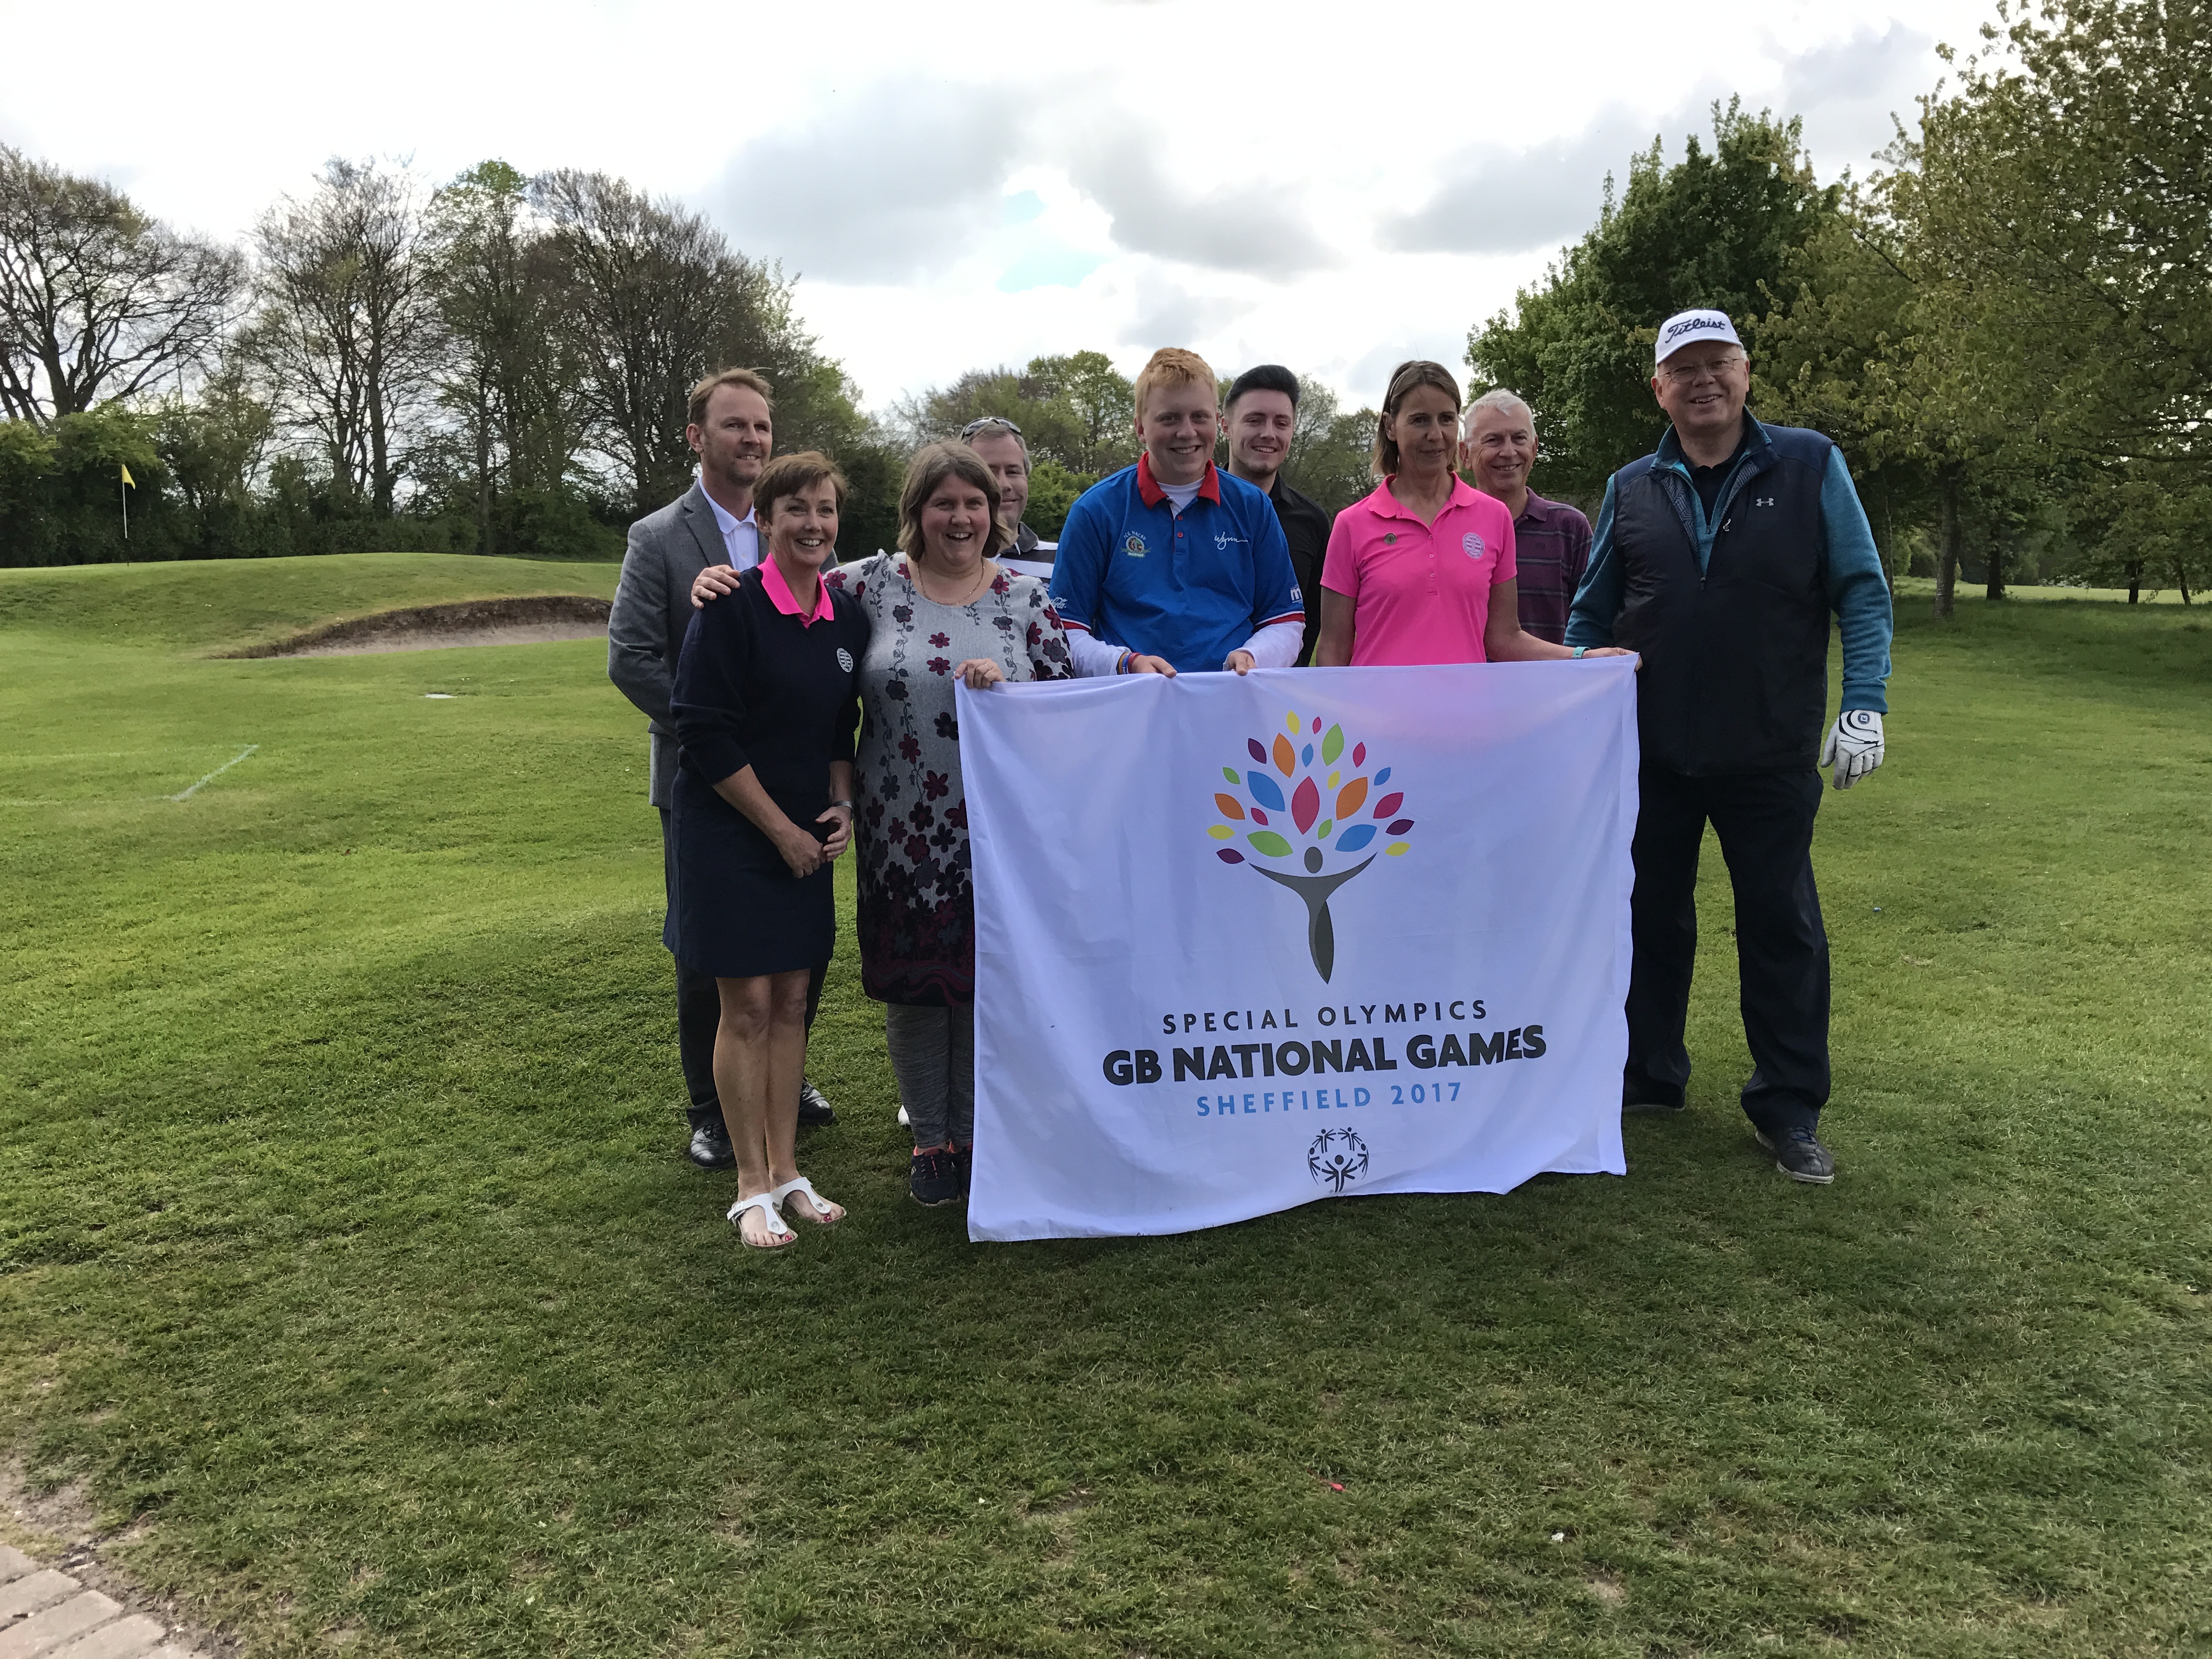 Warren with members of his club, looking forward to the Special Olympics GB National Games in Sheffield